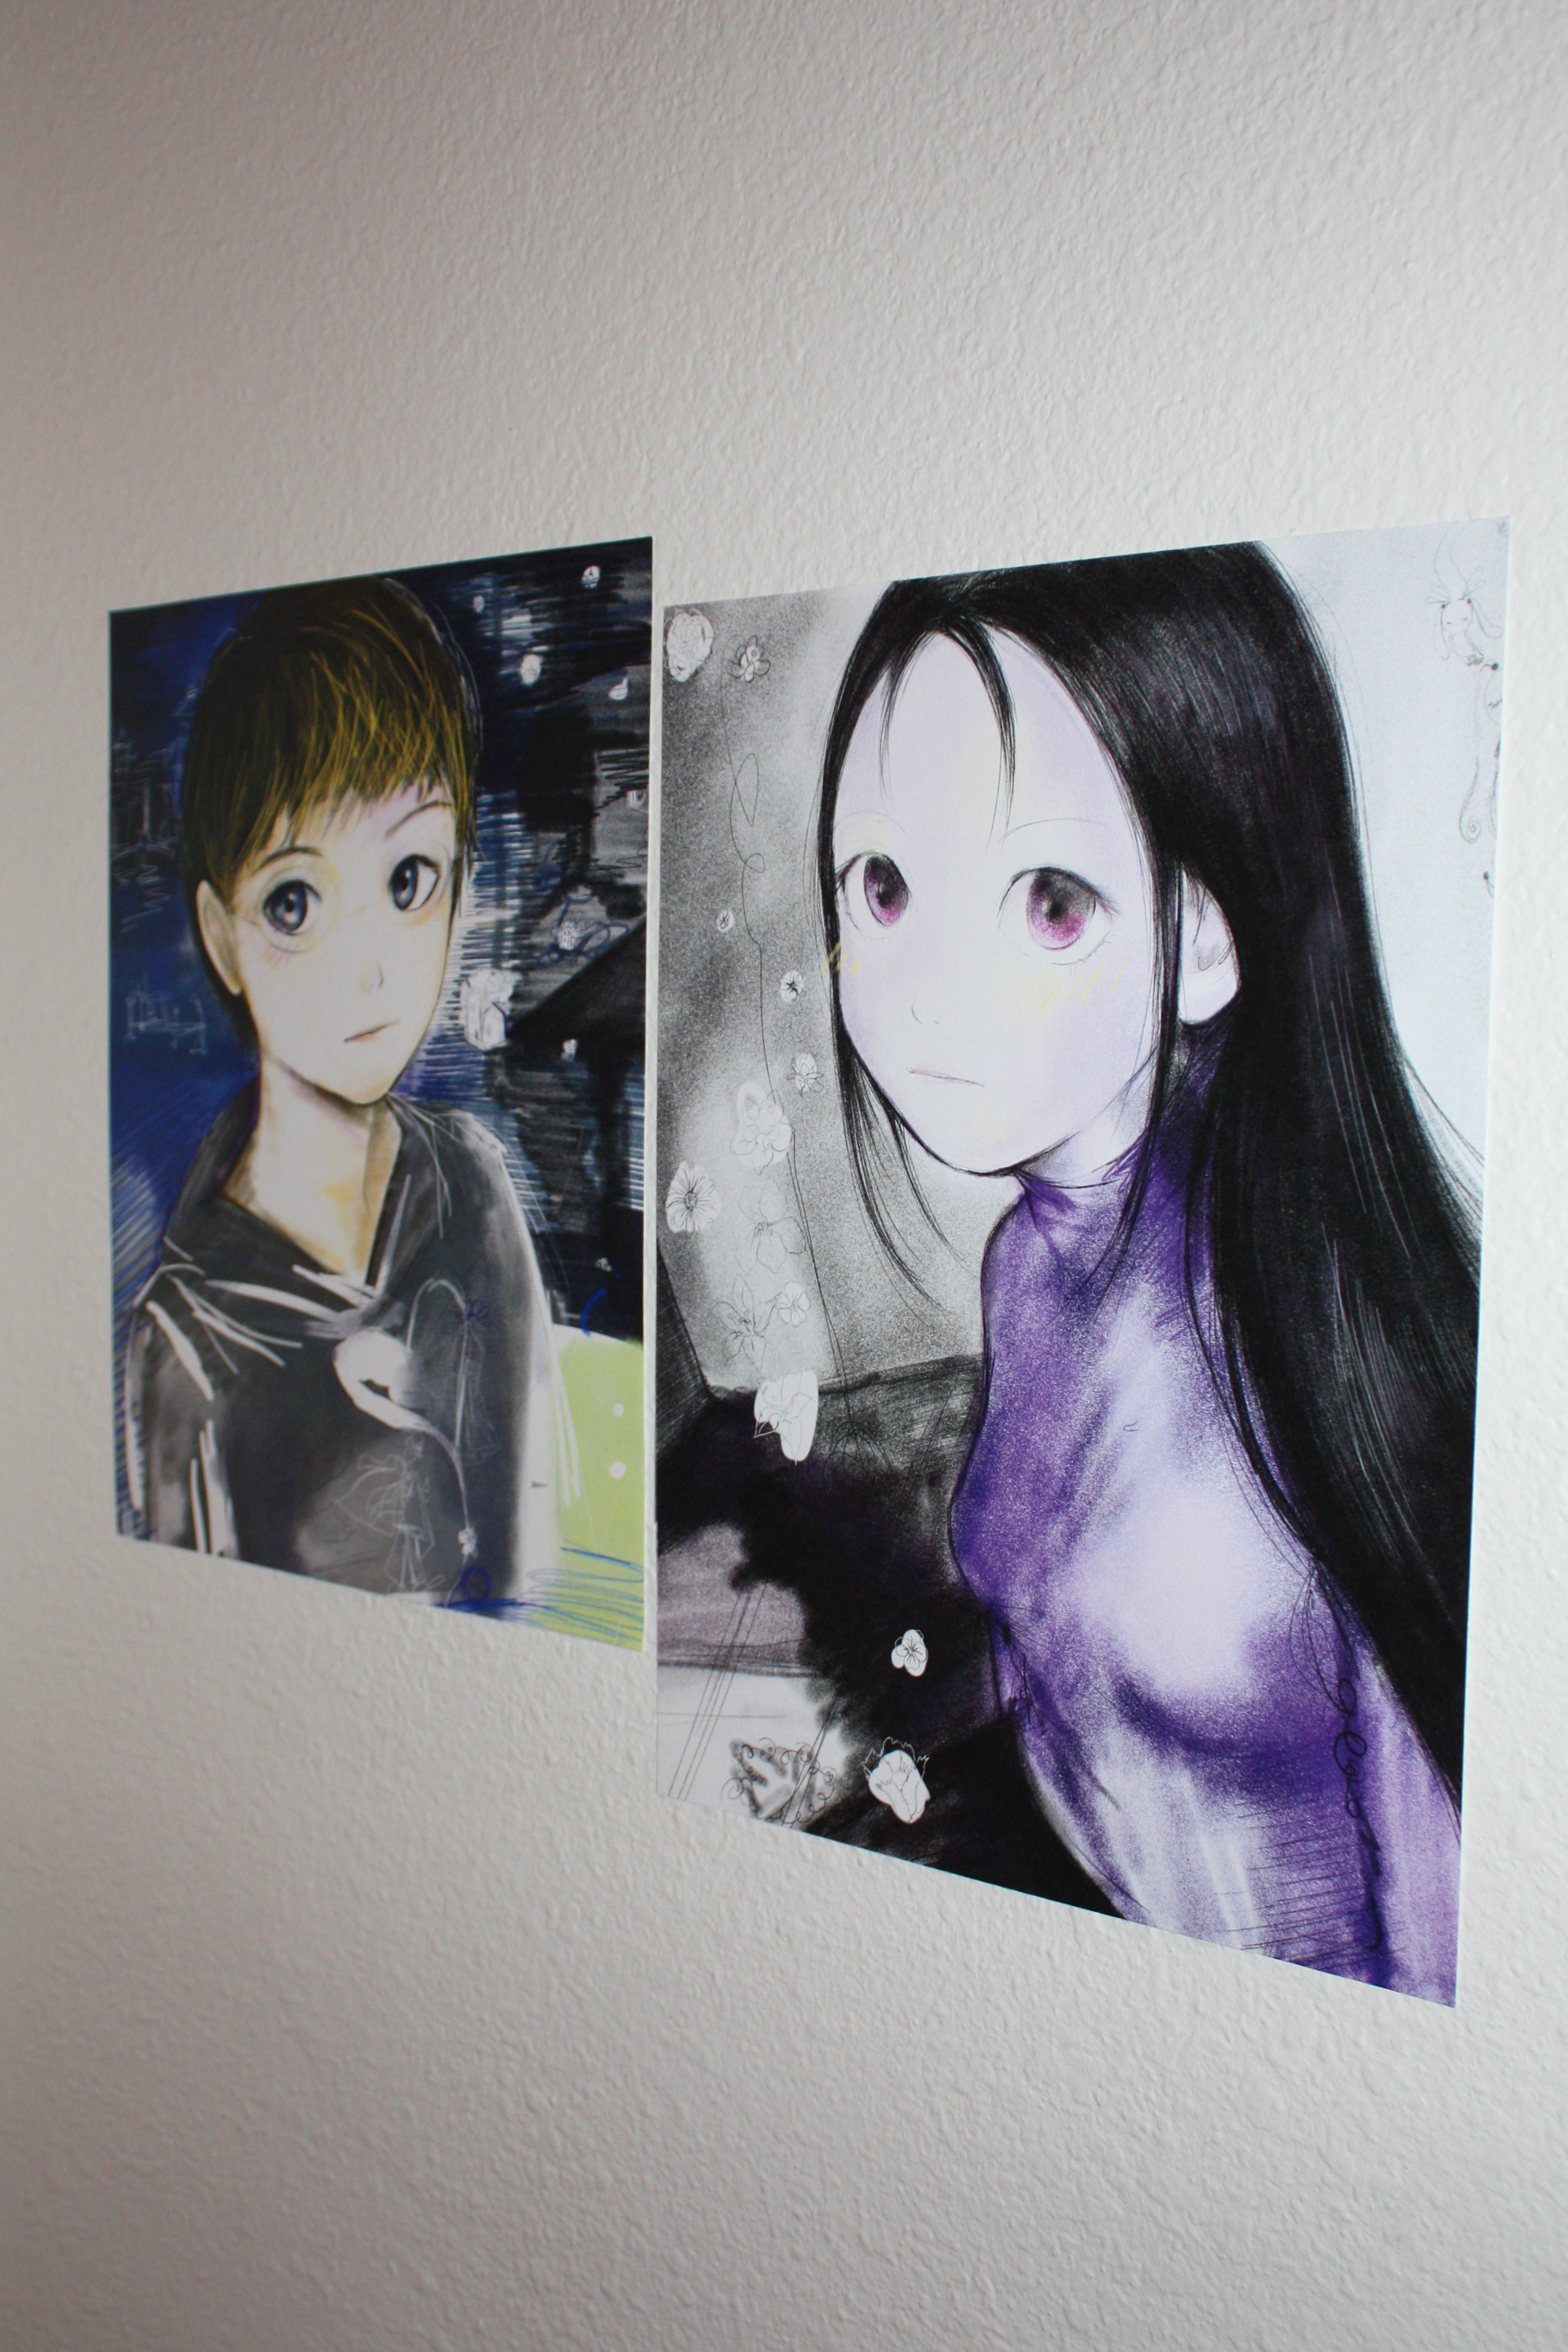 Two prints of anime figures looking at the camera hung on a wall